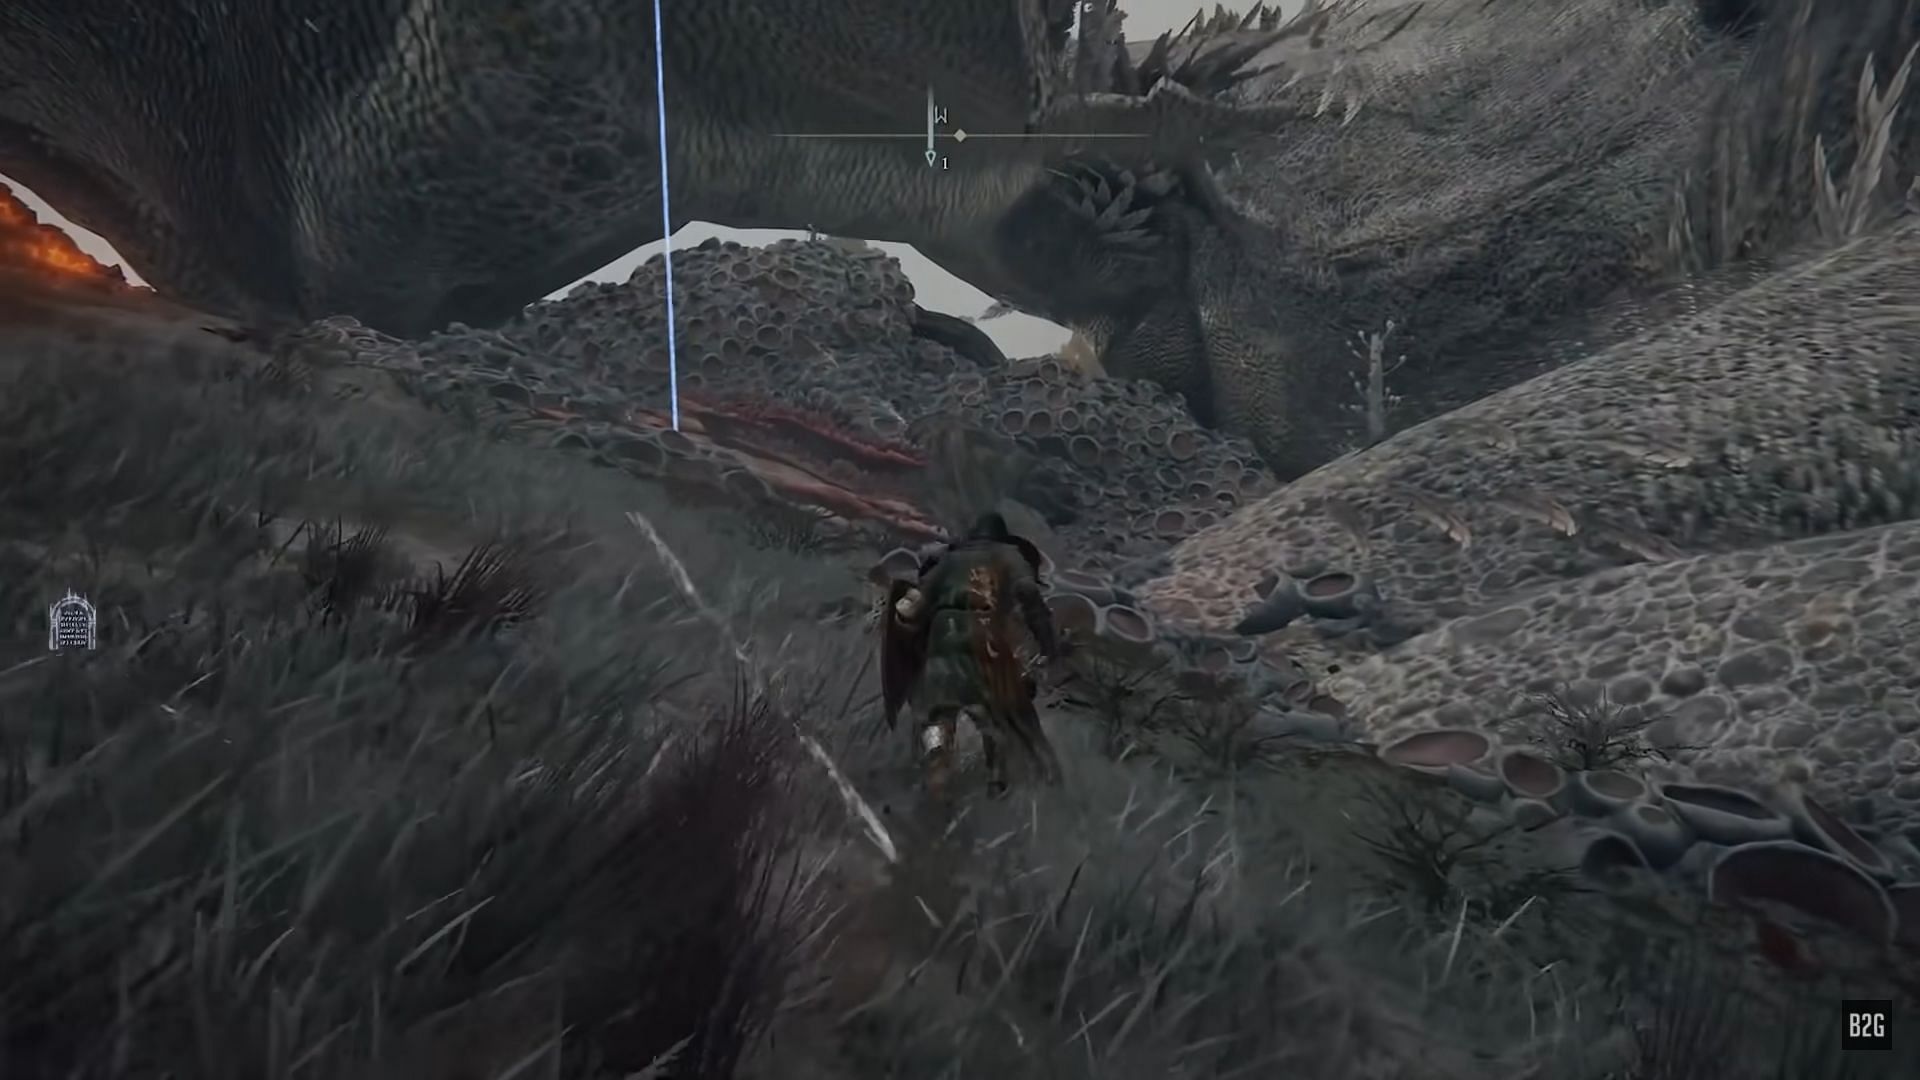 Once ready, gamers can start hitting the dragon from below (Image via B2G/Youtube)